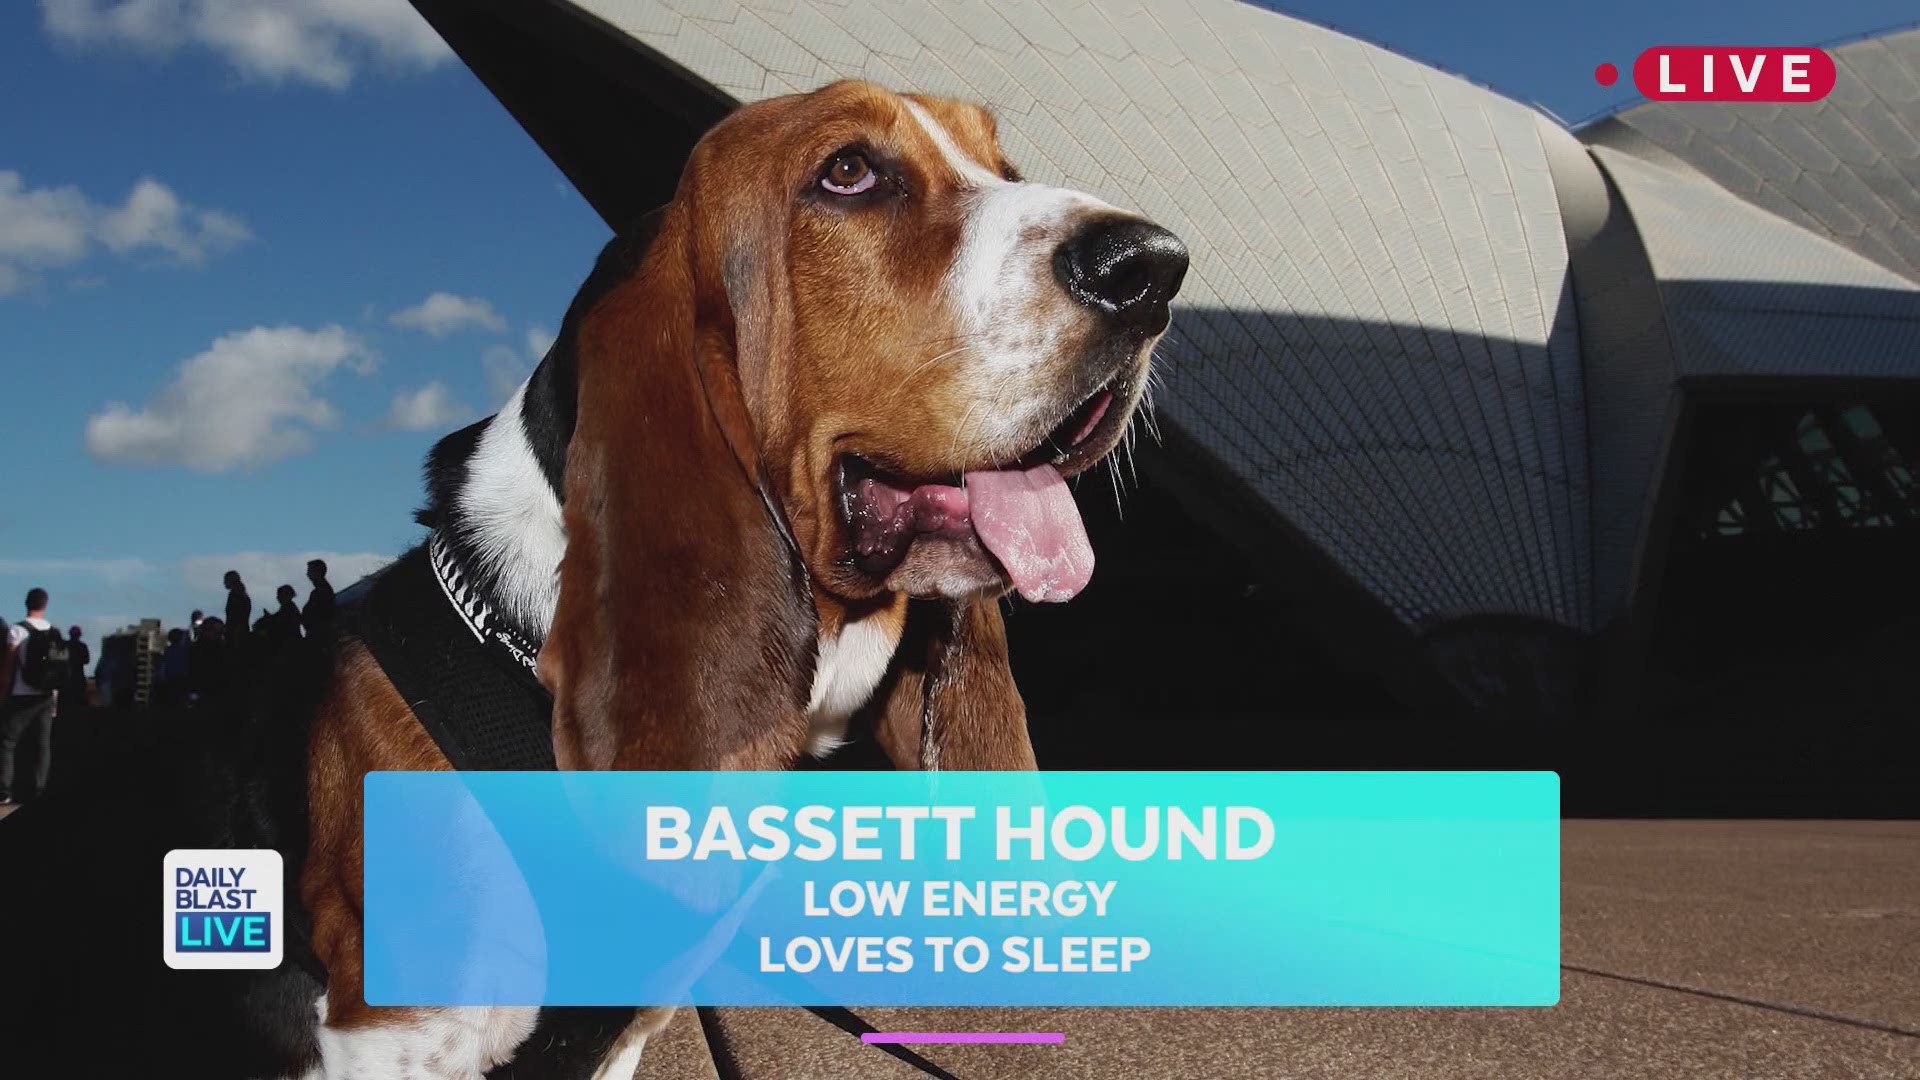 Are you a go-getter with a busy career? Turns out you can still own a fluffy friend! Daily Blast LIVE has rounded up some of the best dog breeds for your 9-5 lifestyle. Of course no dog wants to be left alone for too long, but with a healthy mix of work a